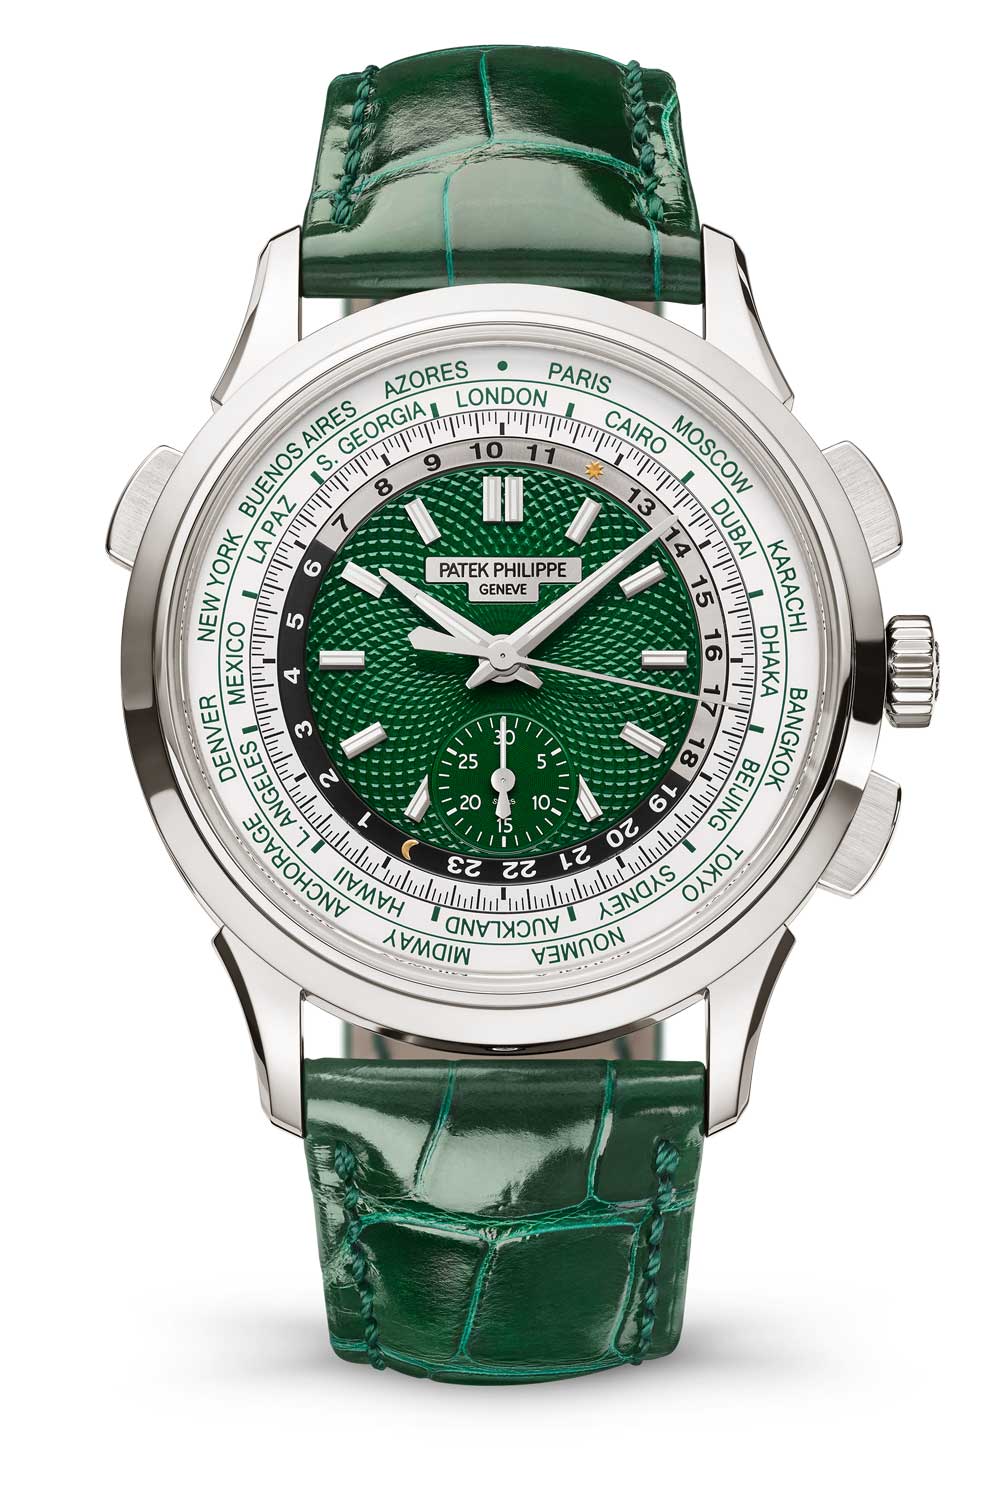 Reference 5930P-001 Self-winding World Time Flyback Chronograph in platinum